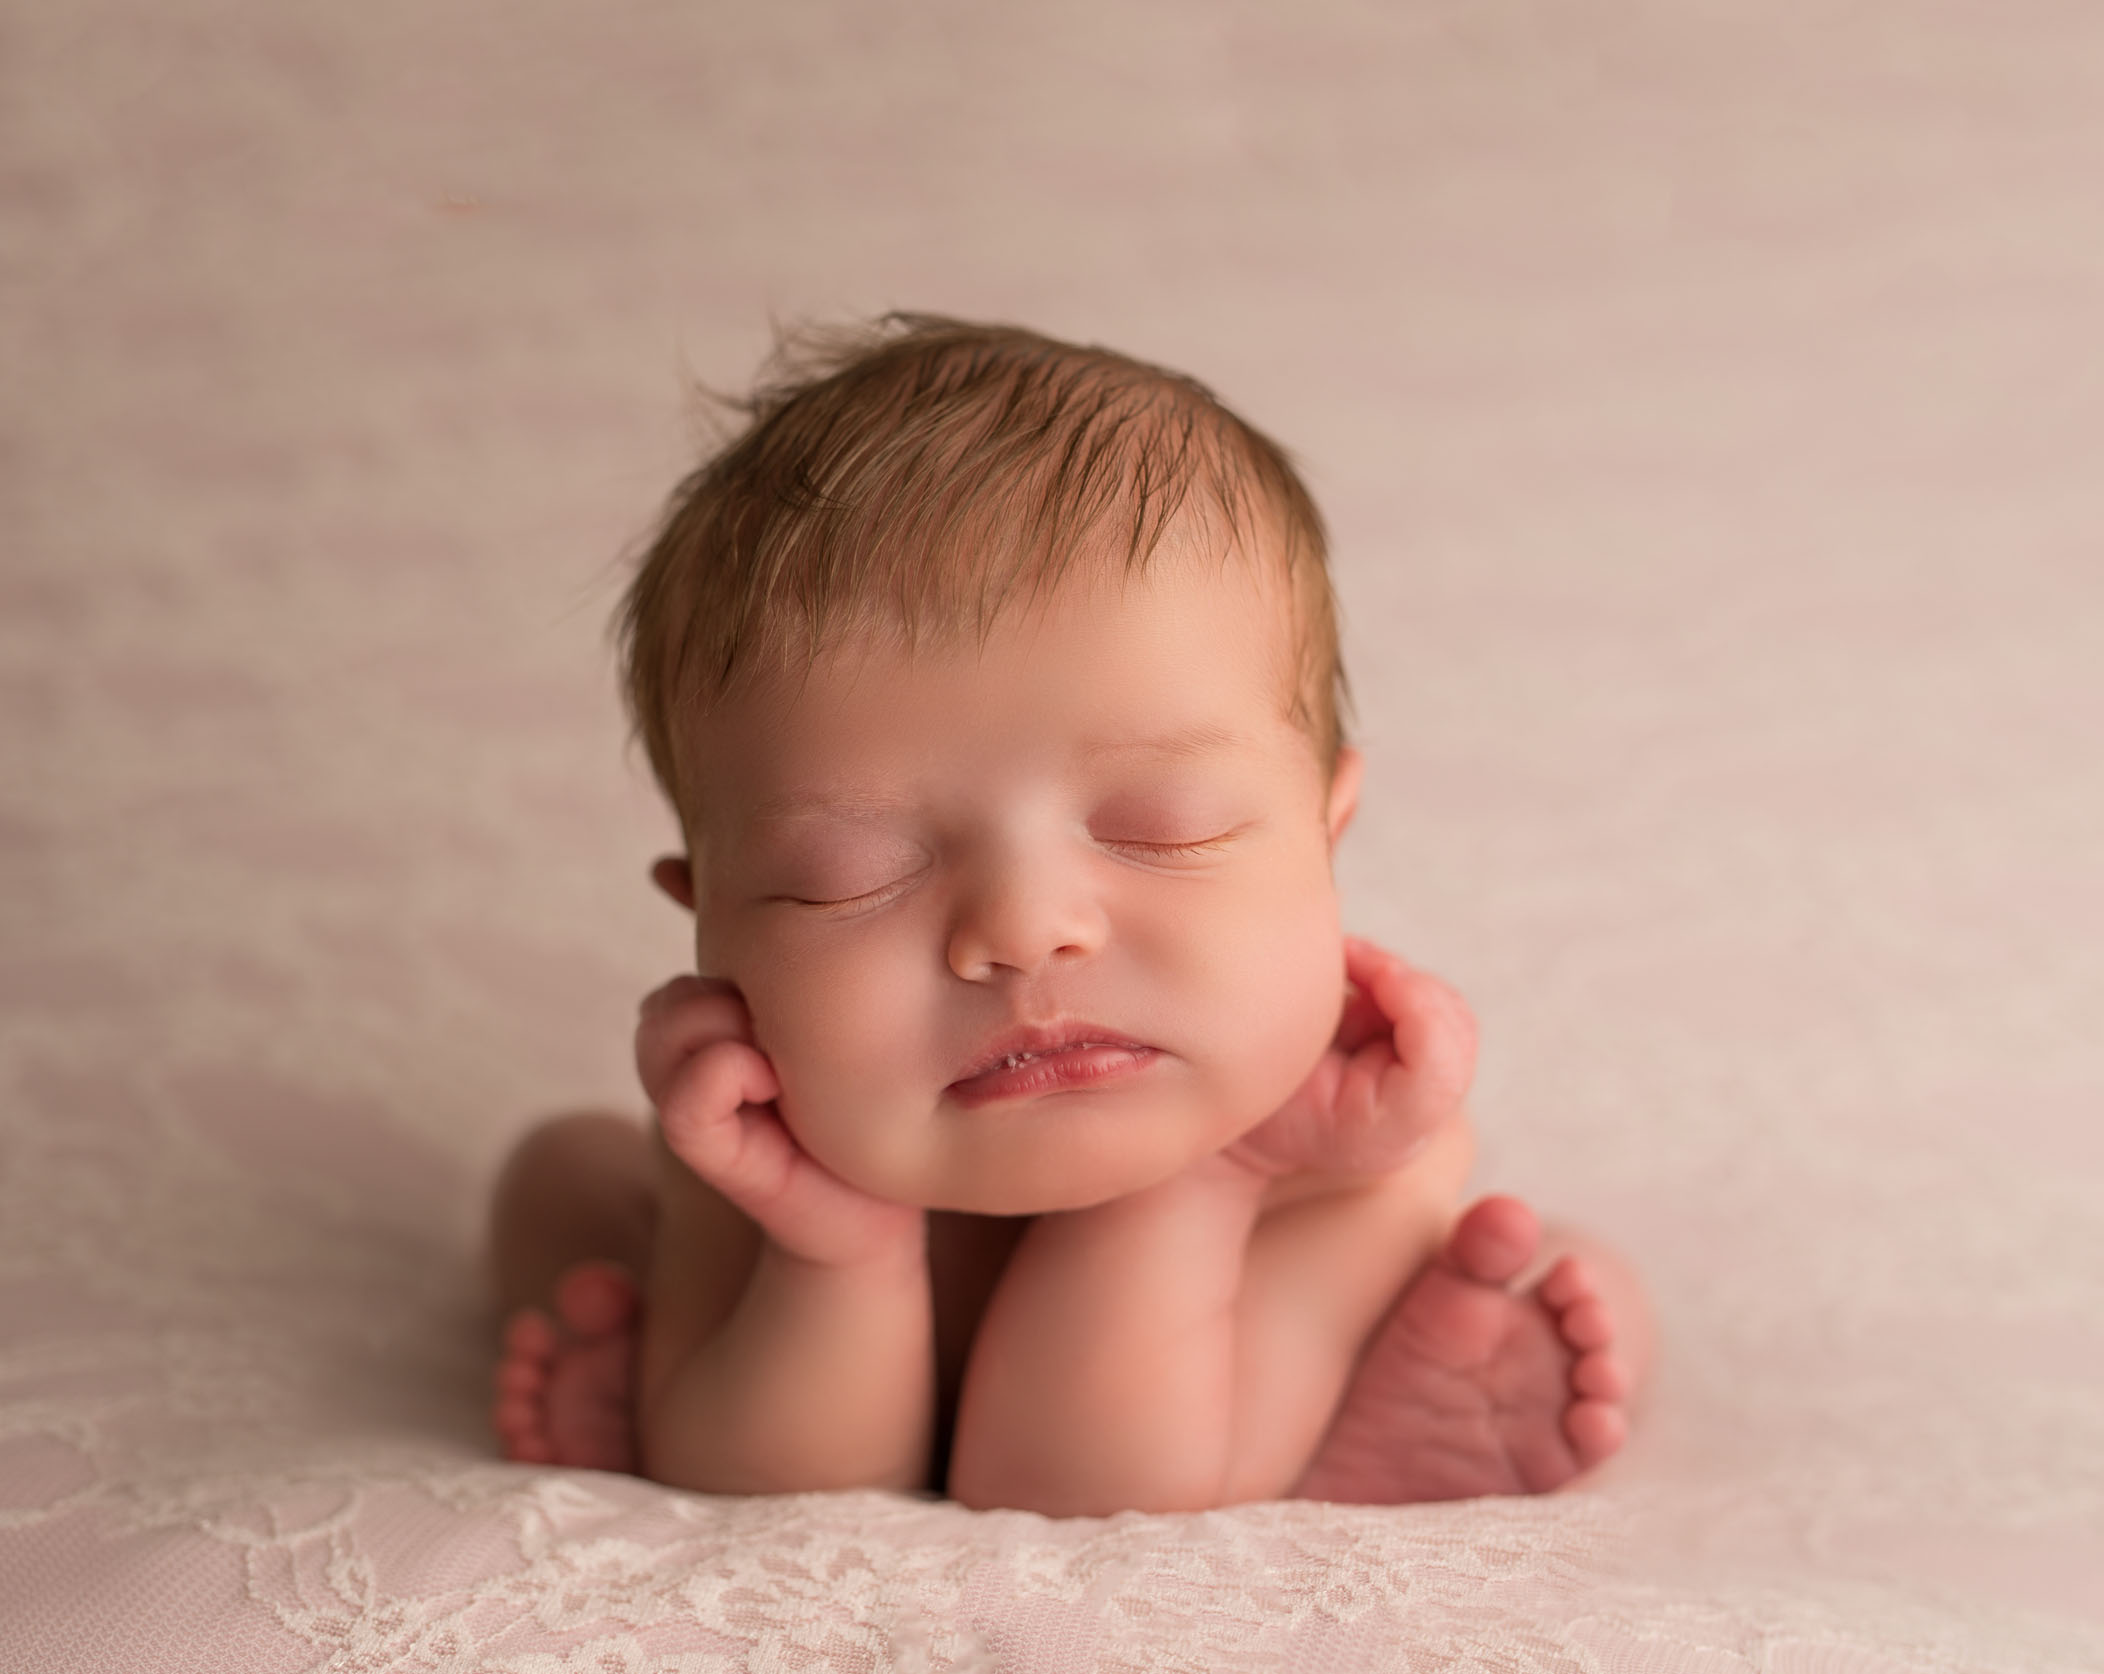 newborn baby in froggy position on pink background